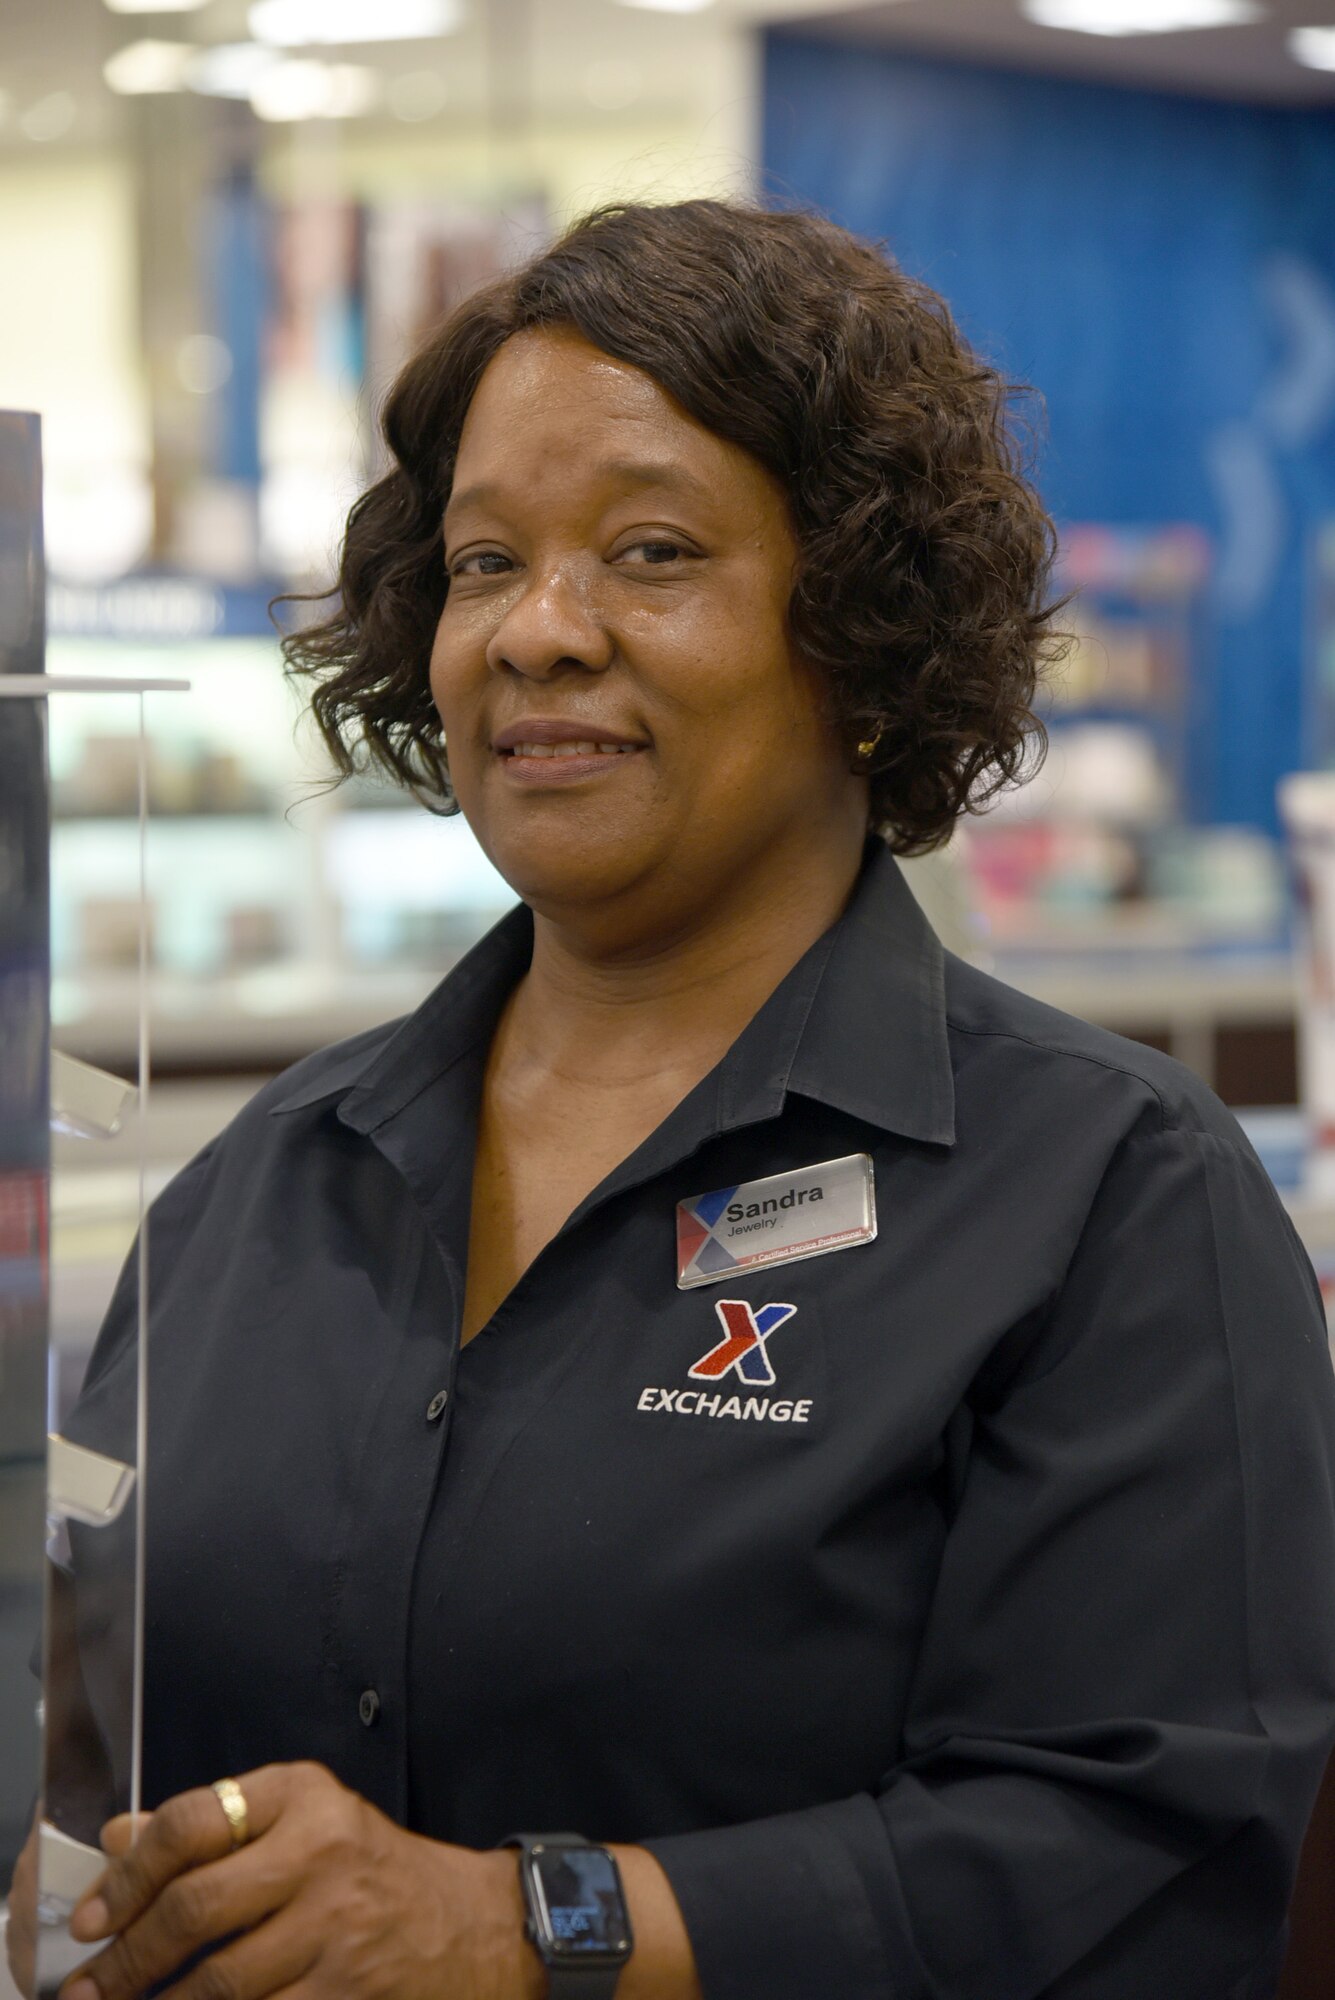 Sandra Brown is a jewelry associate at the Tinker Exchange and has worked on base for almost 25 years. Originally from Bossier City, Louisiana, Brown calls Midwest City her home. She enjoys church, reading her Bible, shopping and spending time with family and working with her co-workers.